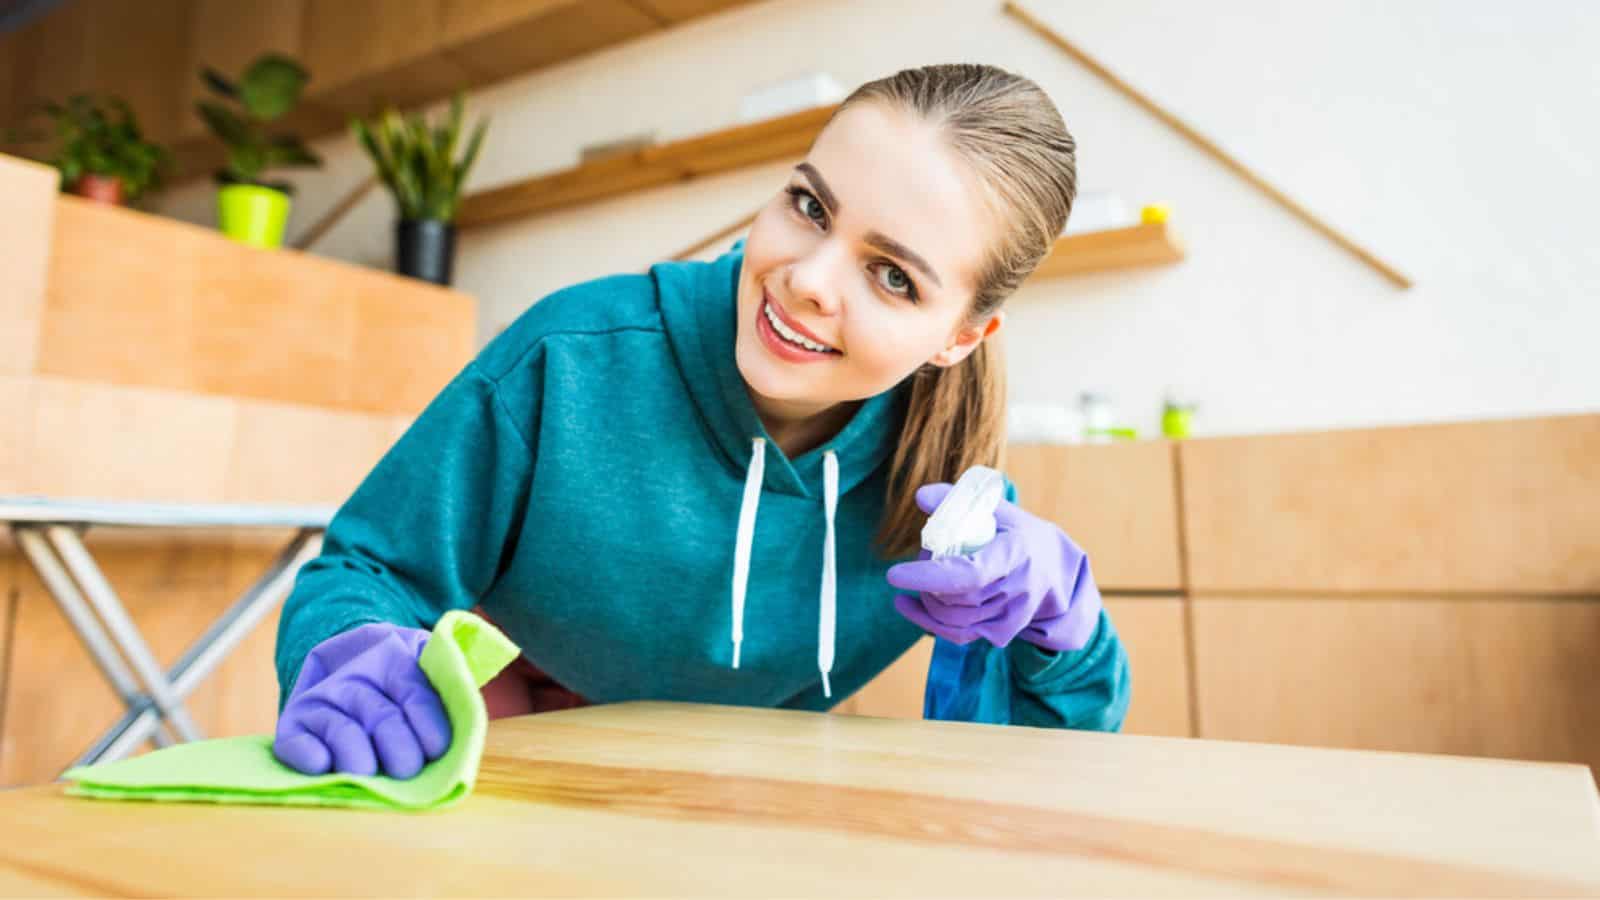 Beautiful young woman smiling at camera while cleaning home